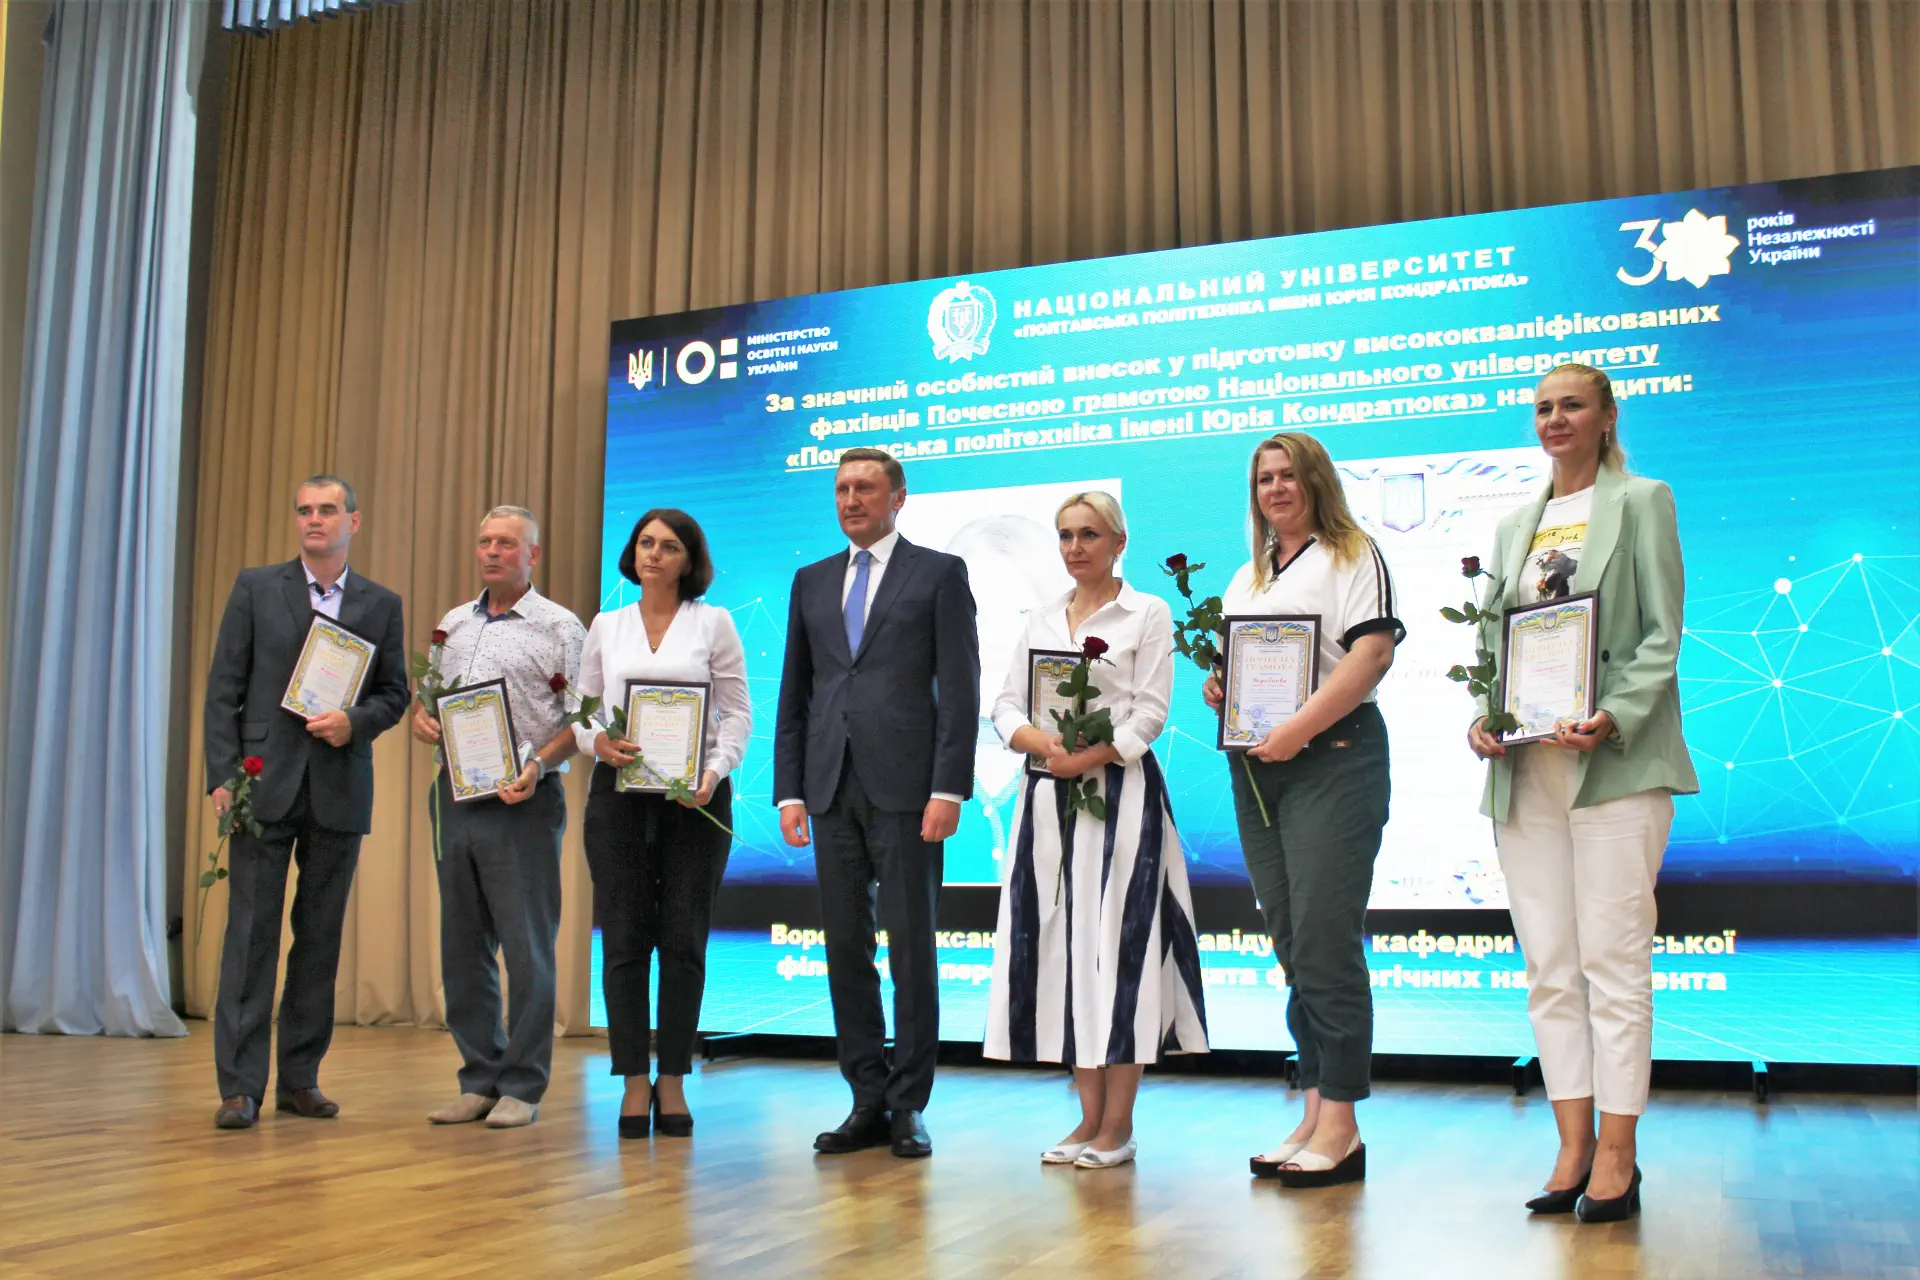 26 employees are awarded Certificates of Merit of the University